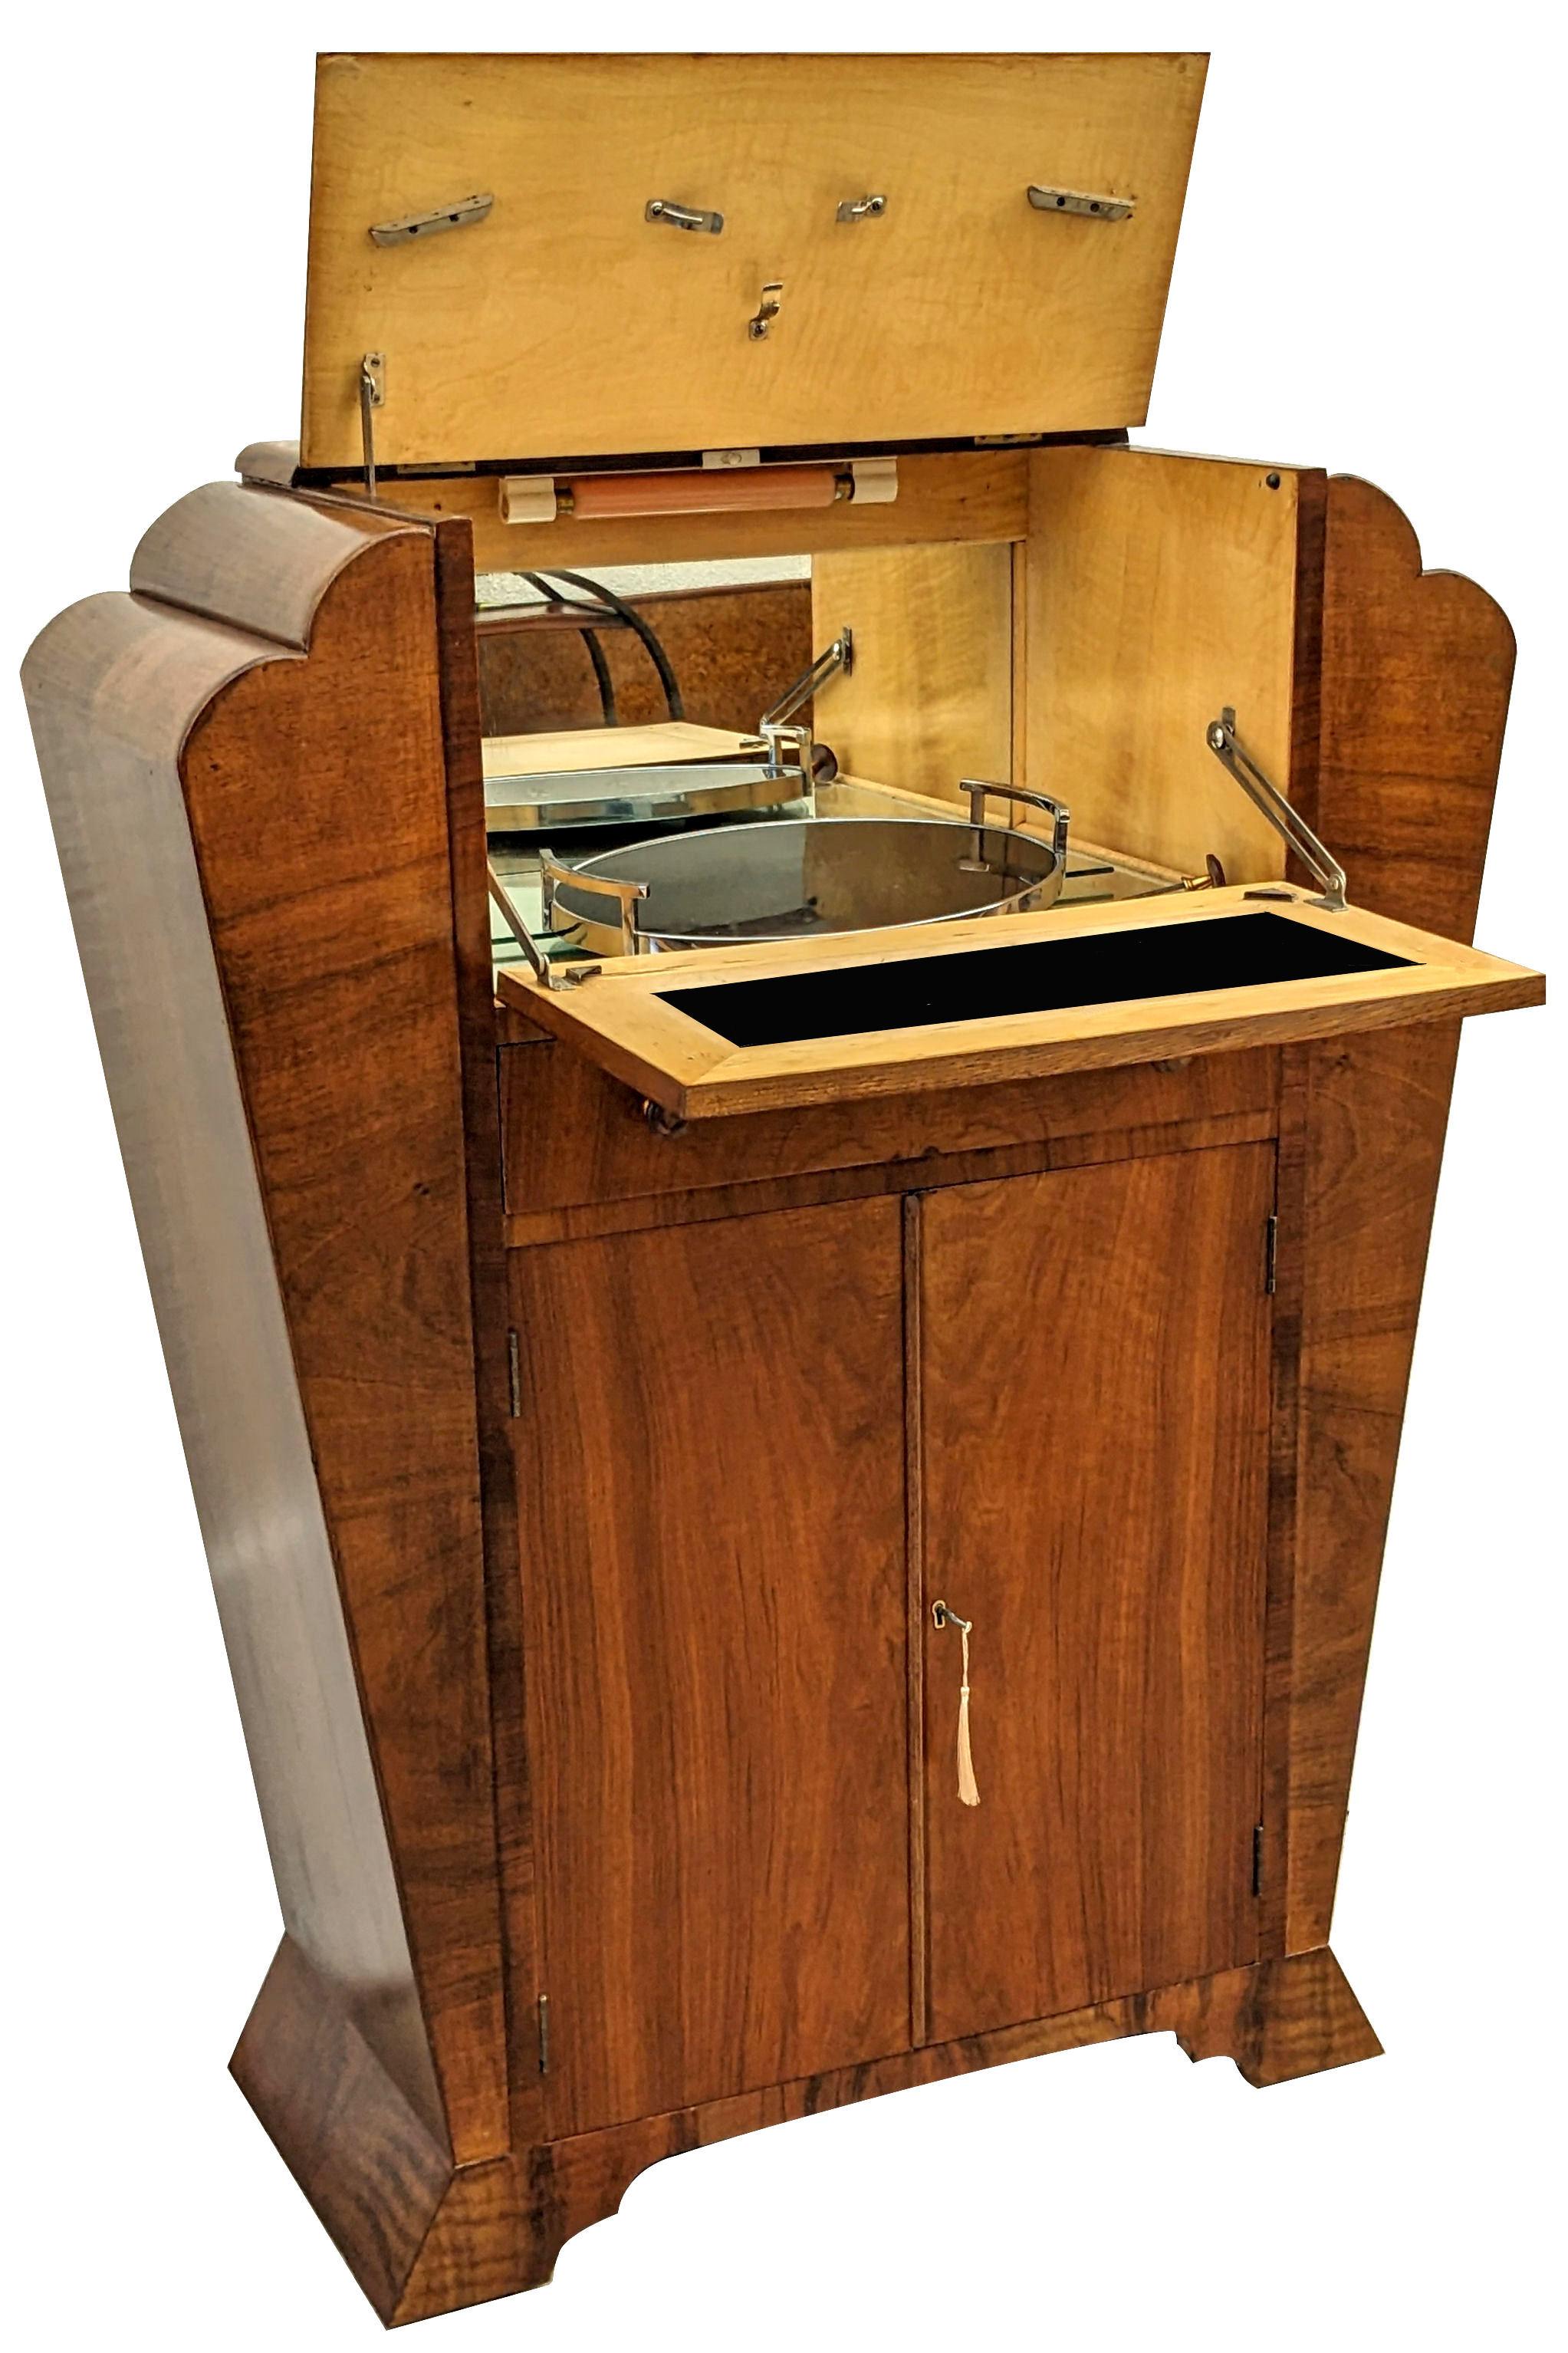 Art Deco Odeon Shaped Dry Bar Cocktail Cabinet, English, c1930 For Sale 3